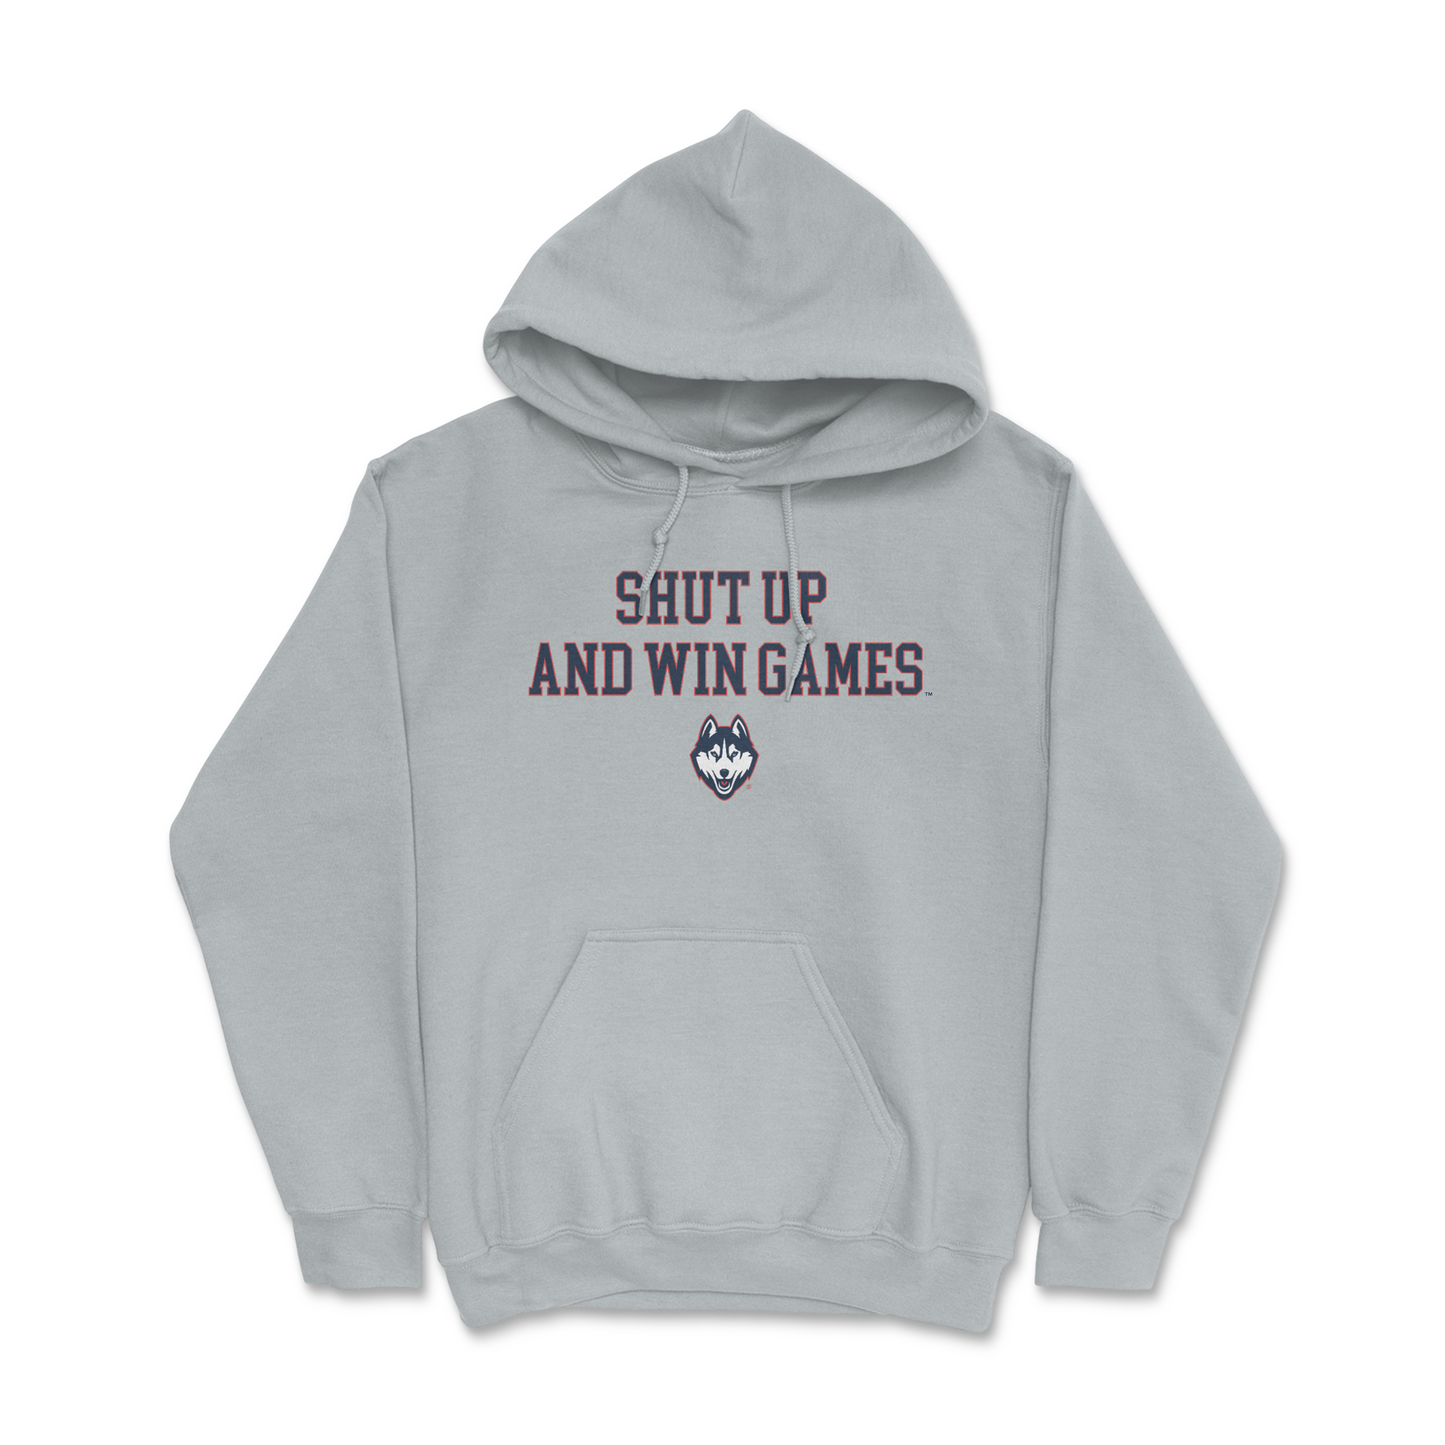 LIMITED RELEASE: UConn Shut Up and Win Games Hoodie in Grey